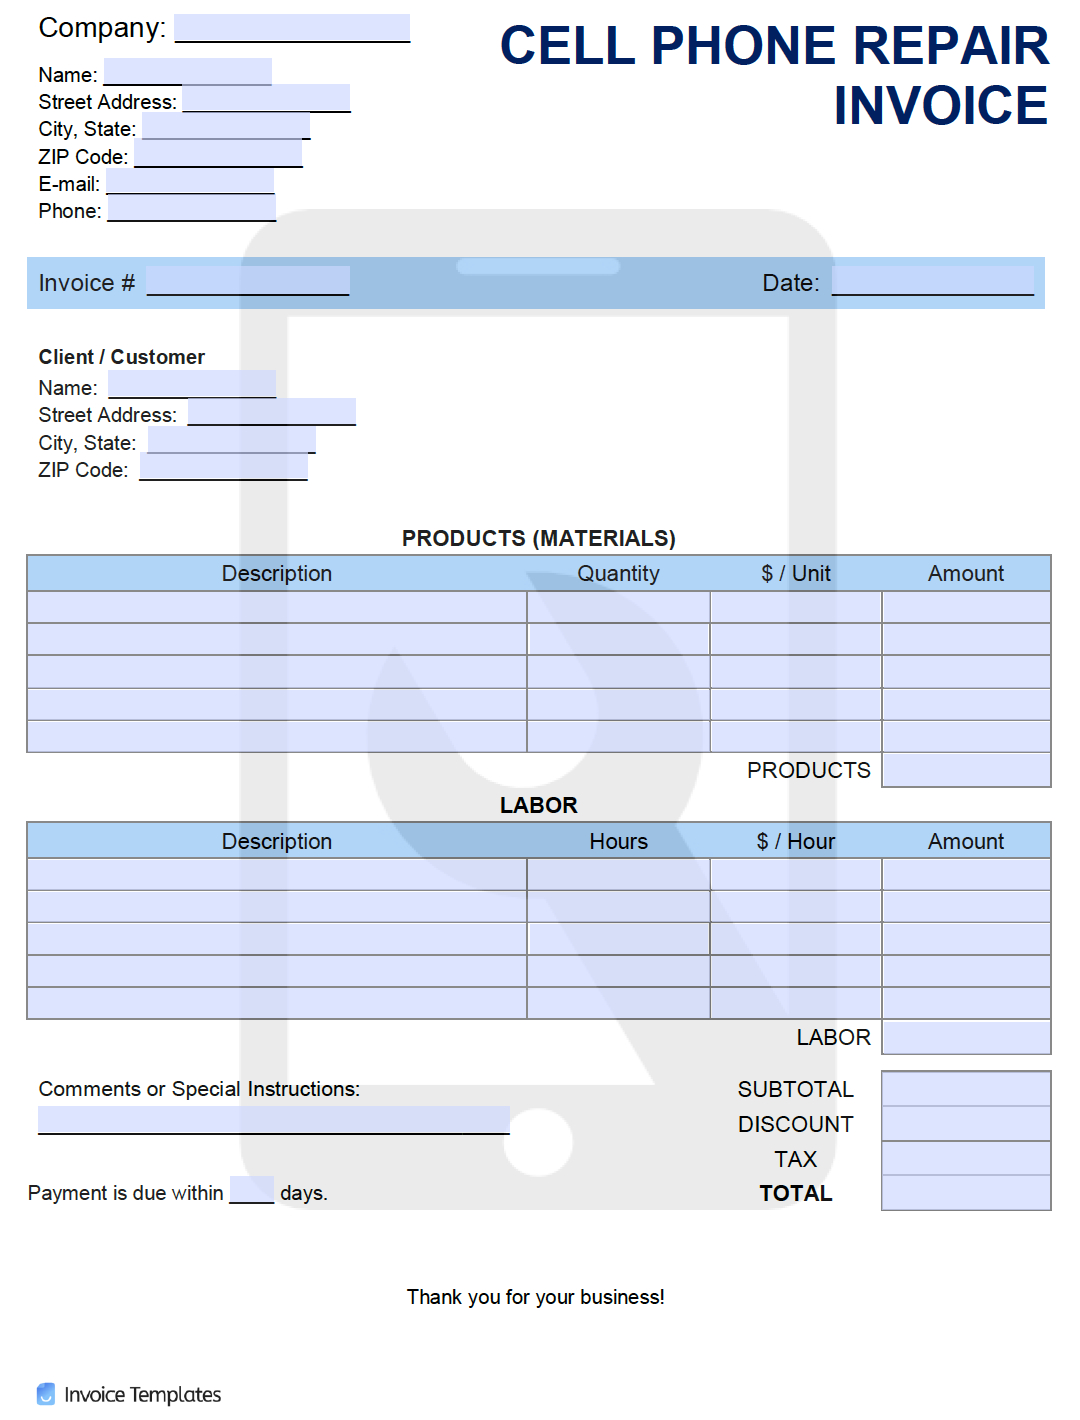 Free Cell Phone Repair Invoice Template | Pdf | Word | Excel intended for Cell Phone Repair Invoice Template